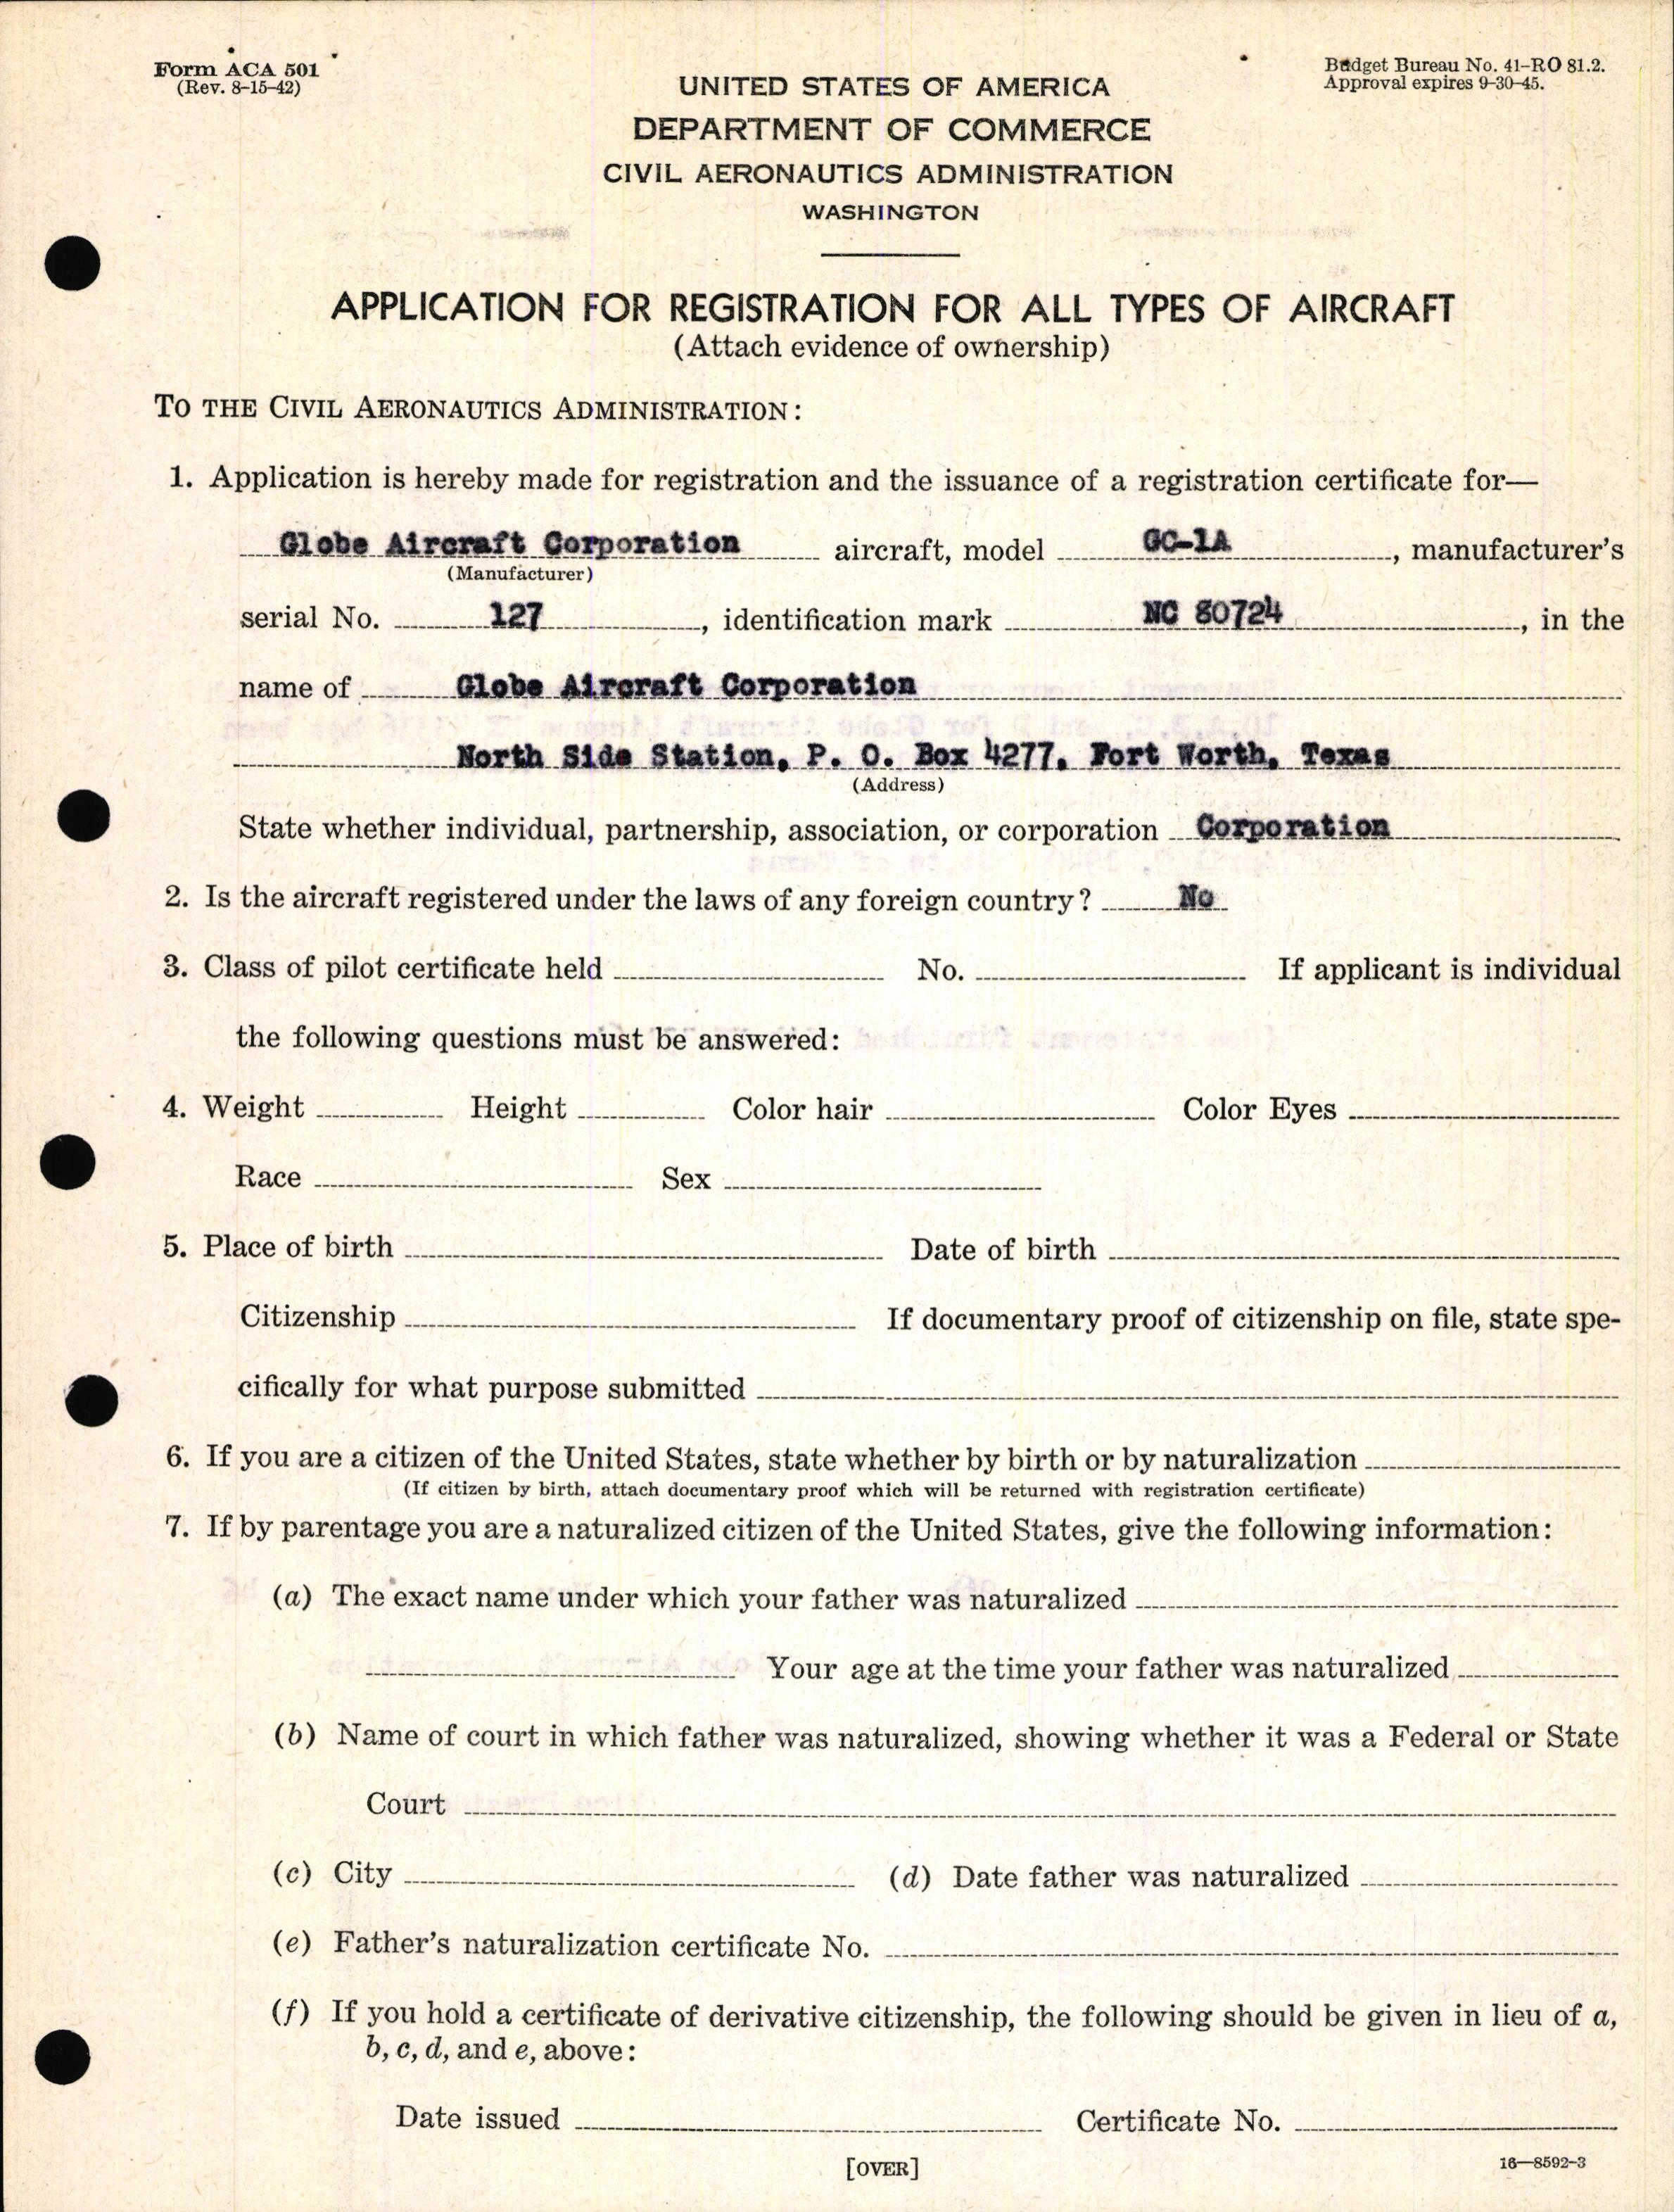 Sample page 5 from AirCorps Library document: Technical Information for Serial Number 127